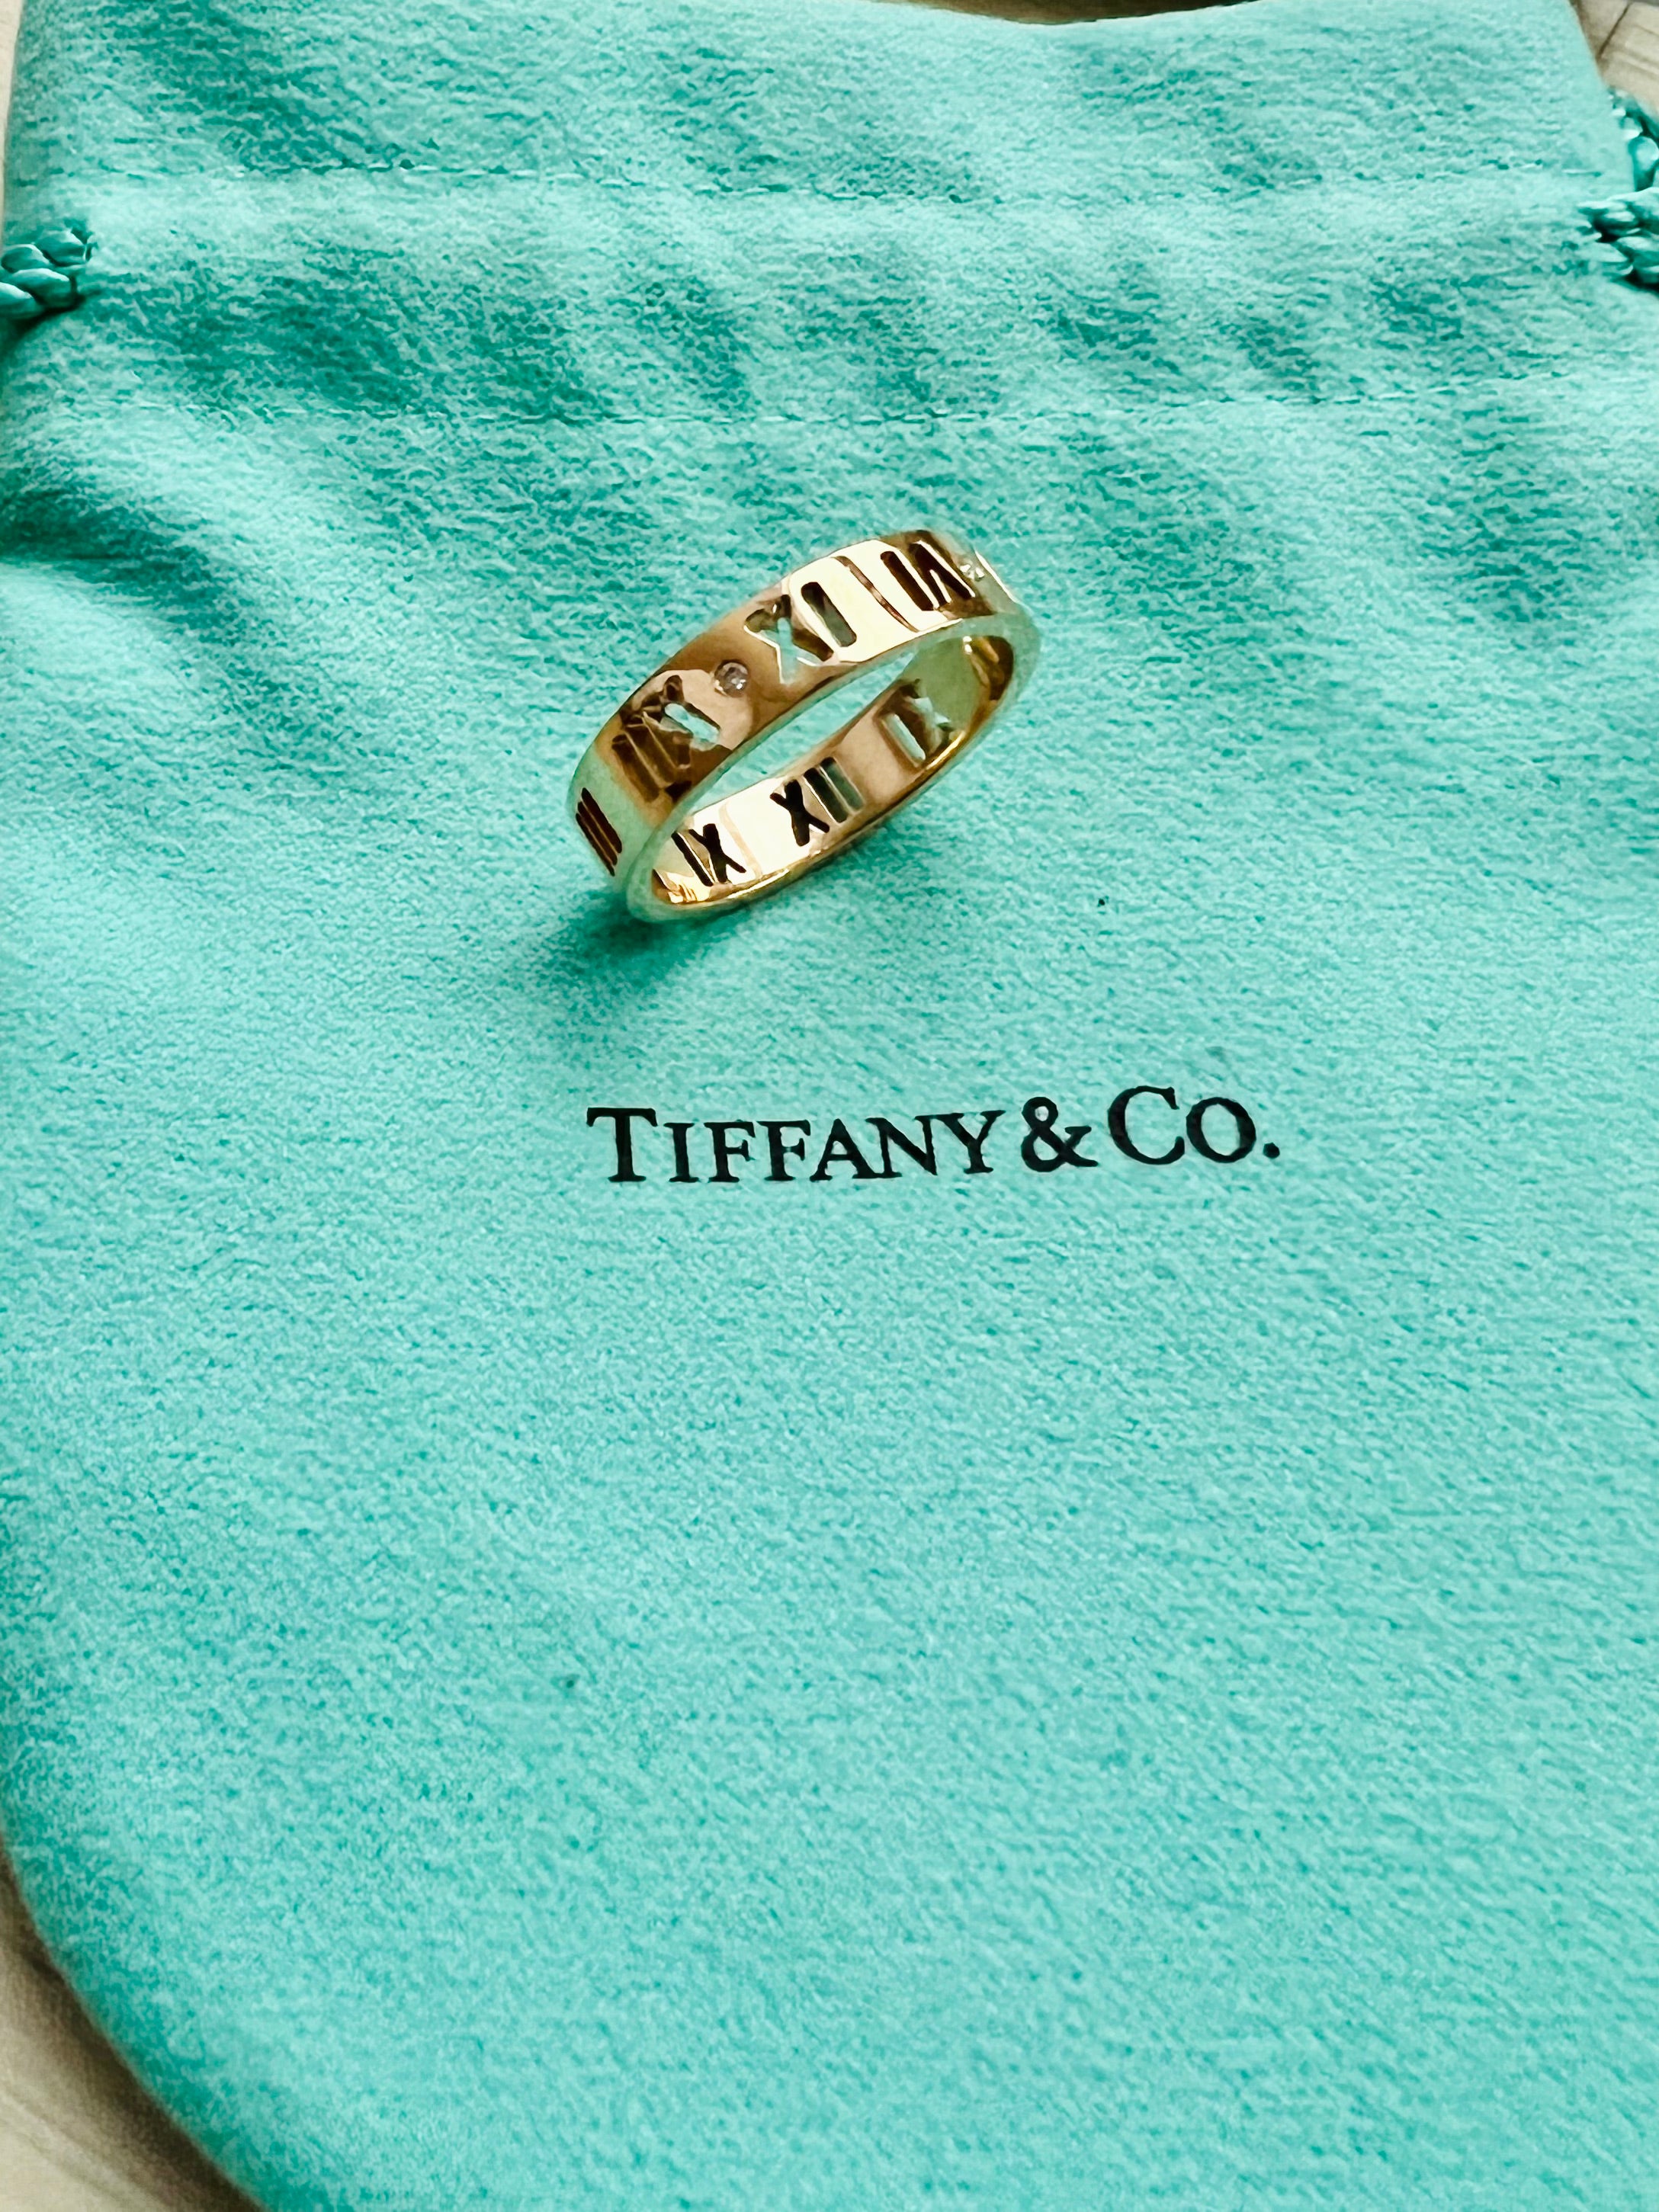 Tiffany & Co. Atlas 18K Rose Gold Narrow Ring with Diamonds Size 8.5  (Discontinued), Women's Fashion, Jewelry & Organisers, Rings on Carousell